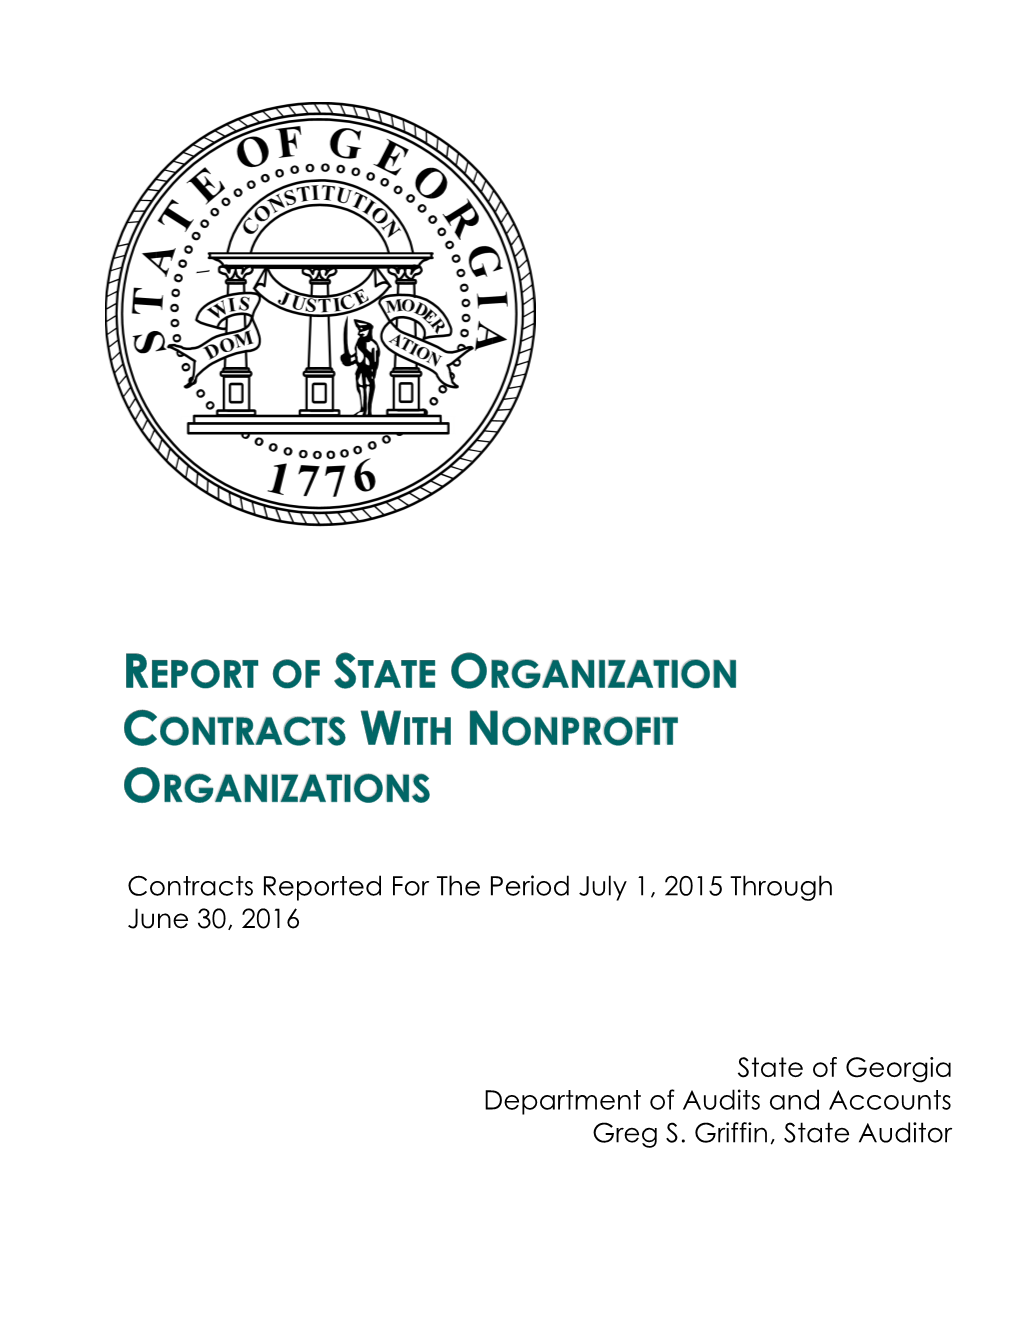 State of Georgia Department of Audits and Accounts Greg S